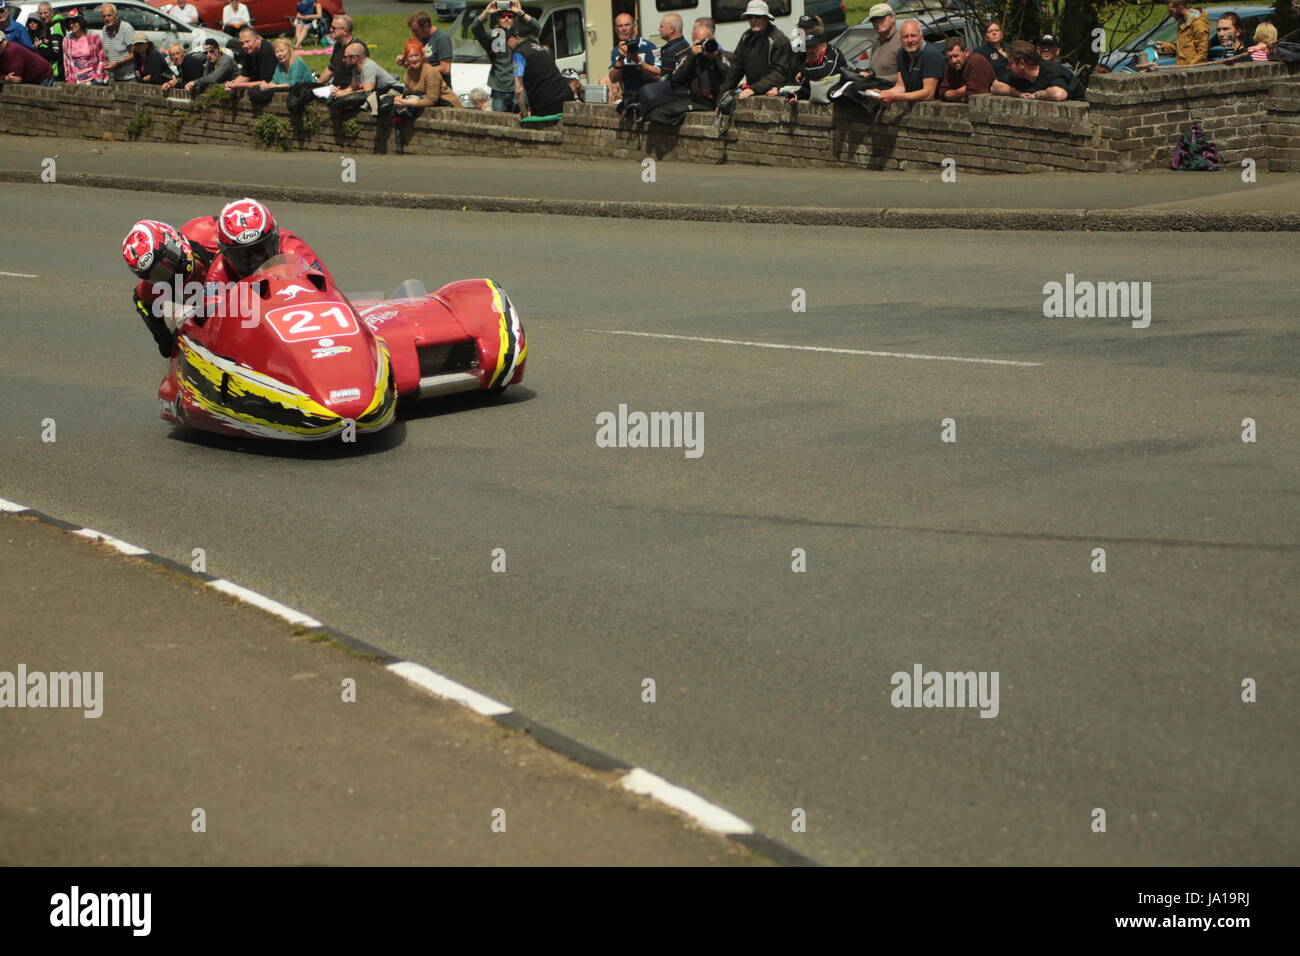 Isle of Man TT Races, Sidecar Qualifying Practice Race, Saturday 3 June 2017. Sidecar qualifying session.  Number 21, Mick Alton and Chrissie Clancy on their 600cc, LCR Suzuki of the J & C Contracting team from Wedderbum, UK.. Credit: Eclectic Art and Photography/Alamy Live News. Stock Photo